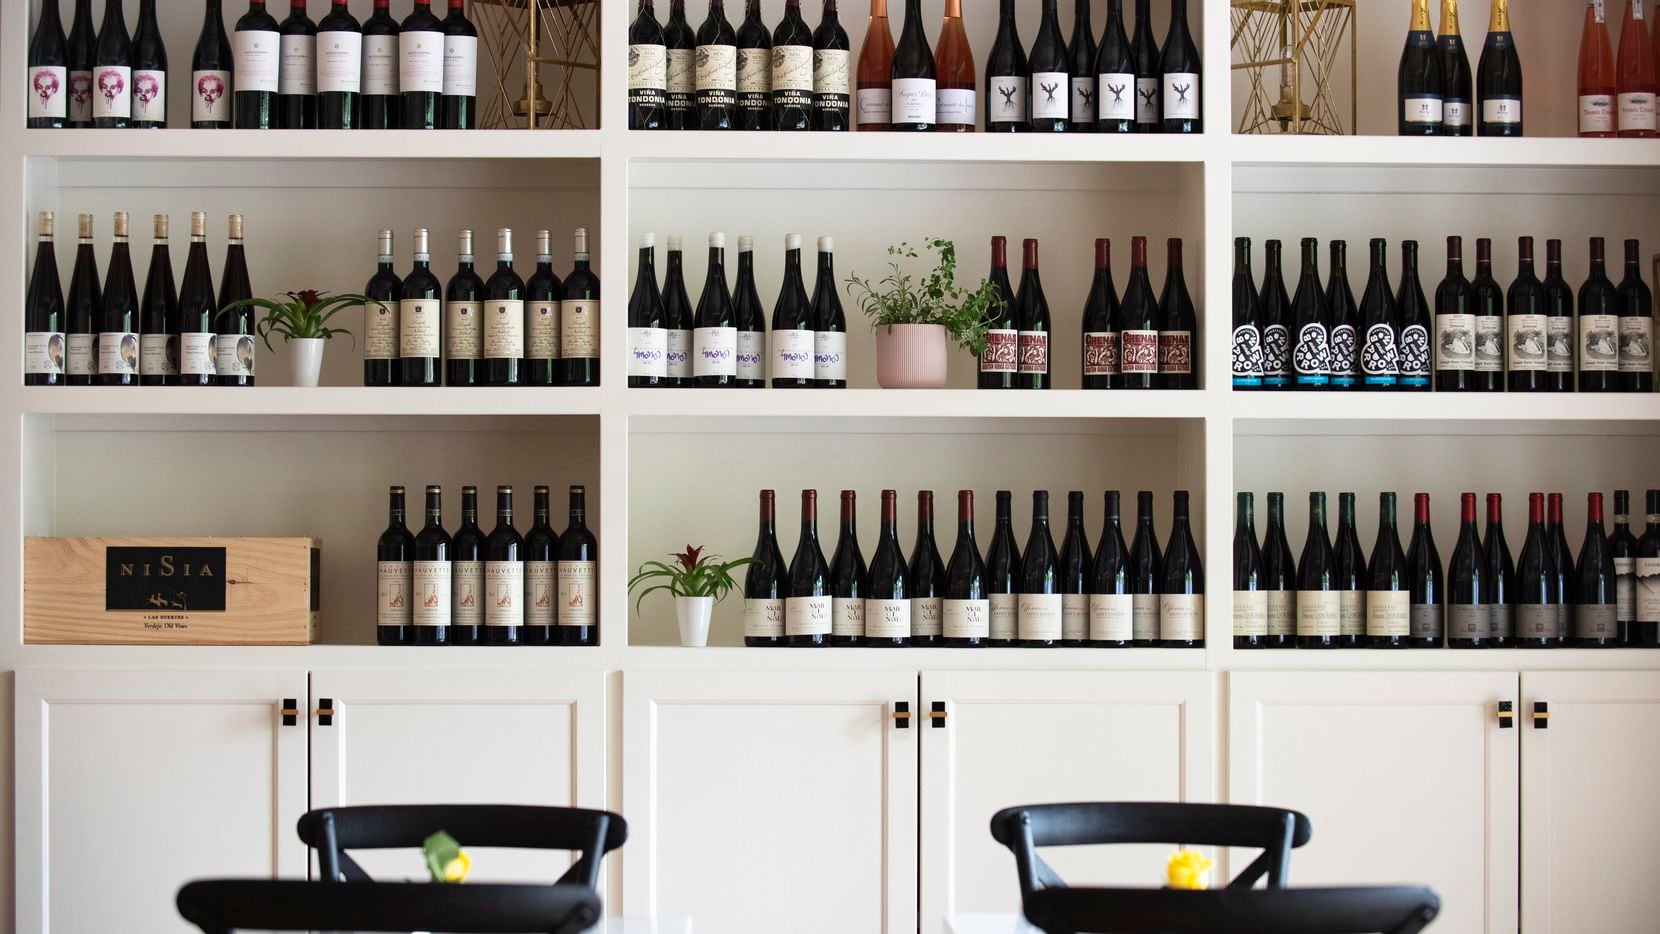 Trova Wine + Market in Dallas is expected to open July 16.